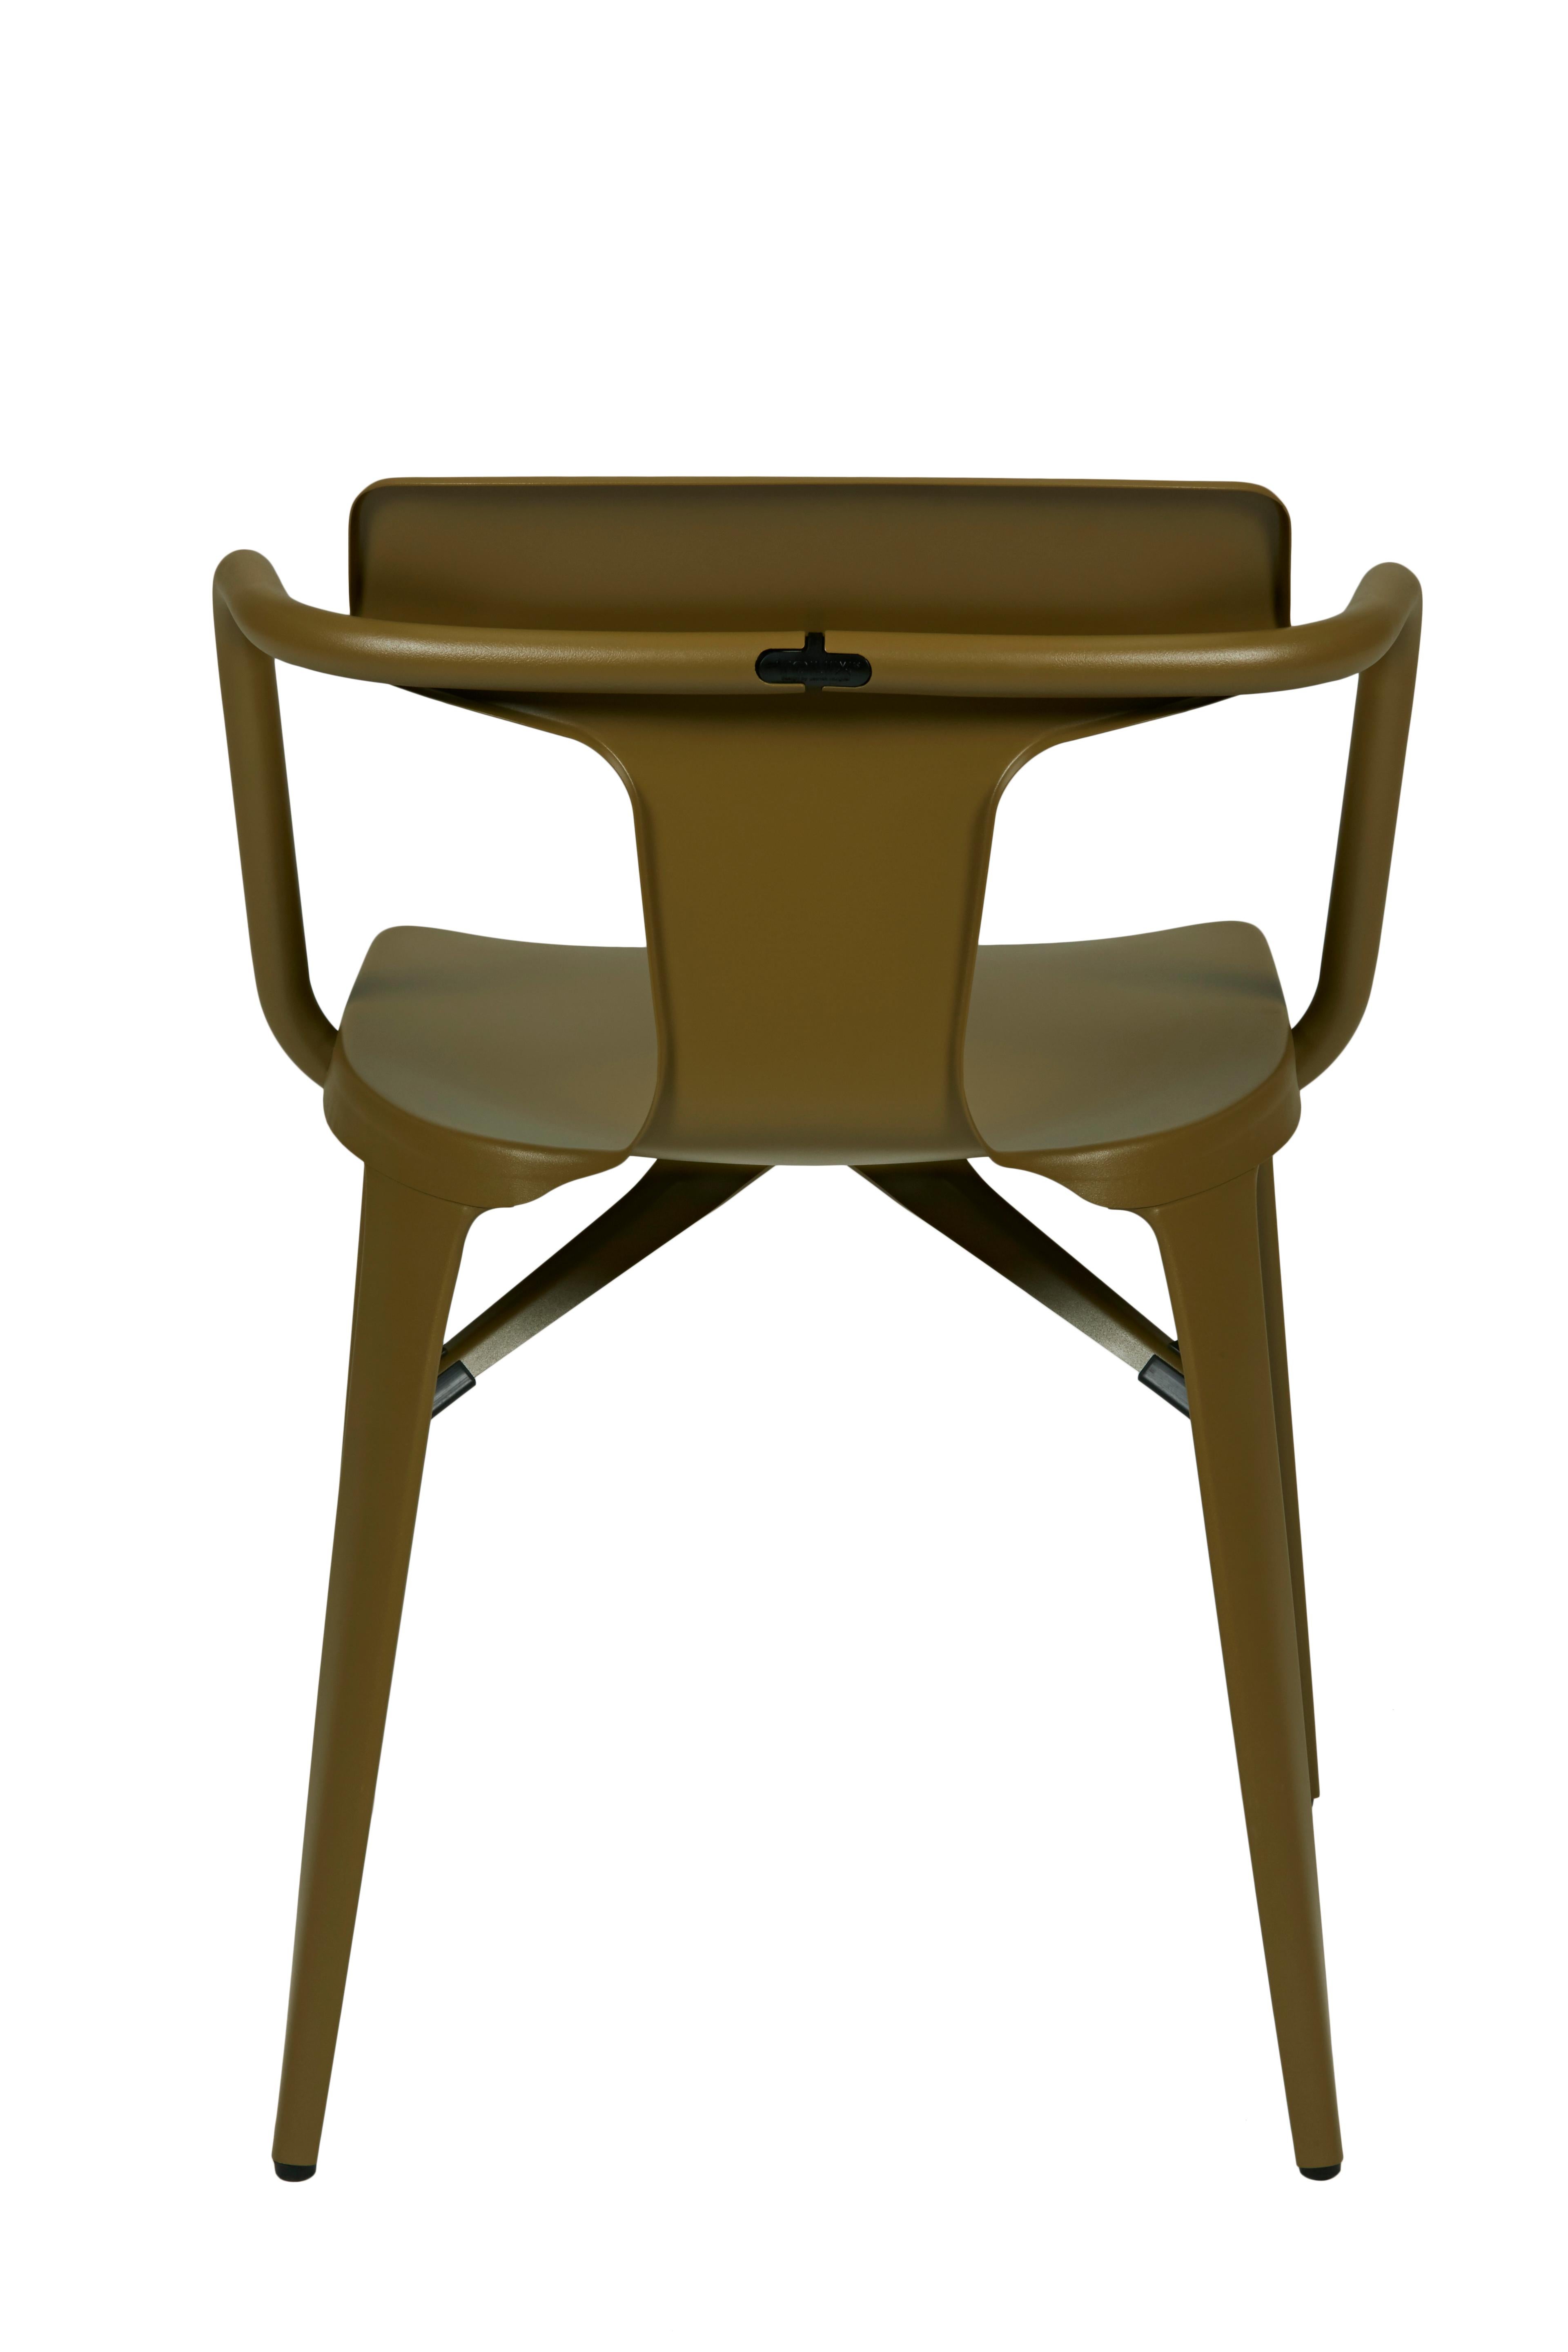 Im Angebot: T14 Chair in Pop Colors by Patrick Norguet and Tolix, Brown (Kaki) 2